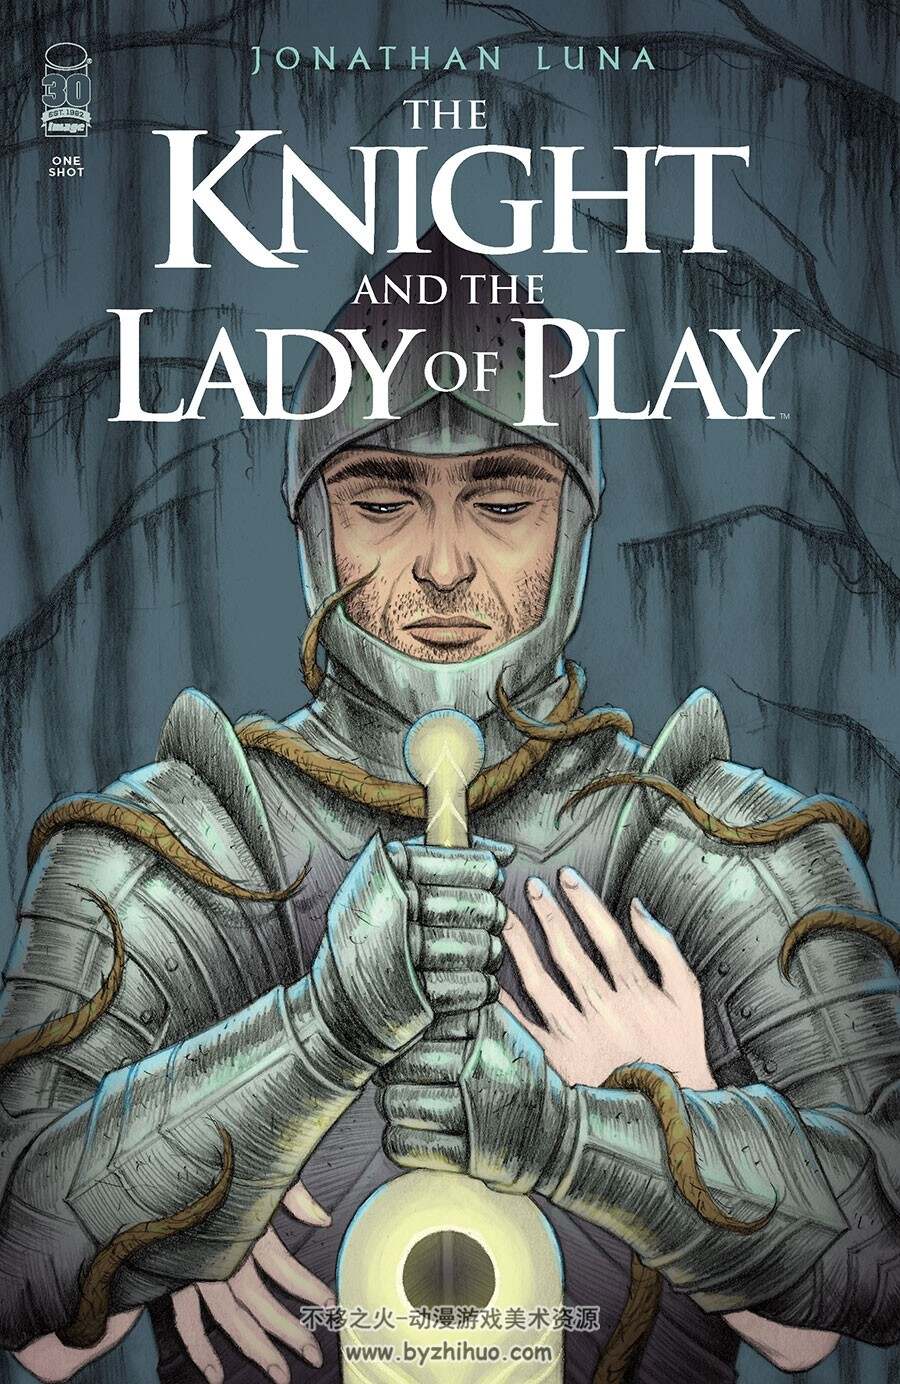 The Knight and the Lady of Play 漫画 百度网盘下载